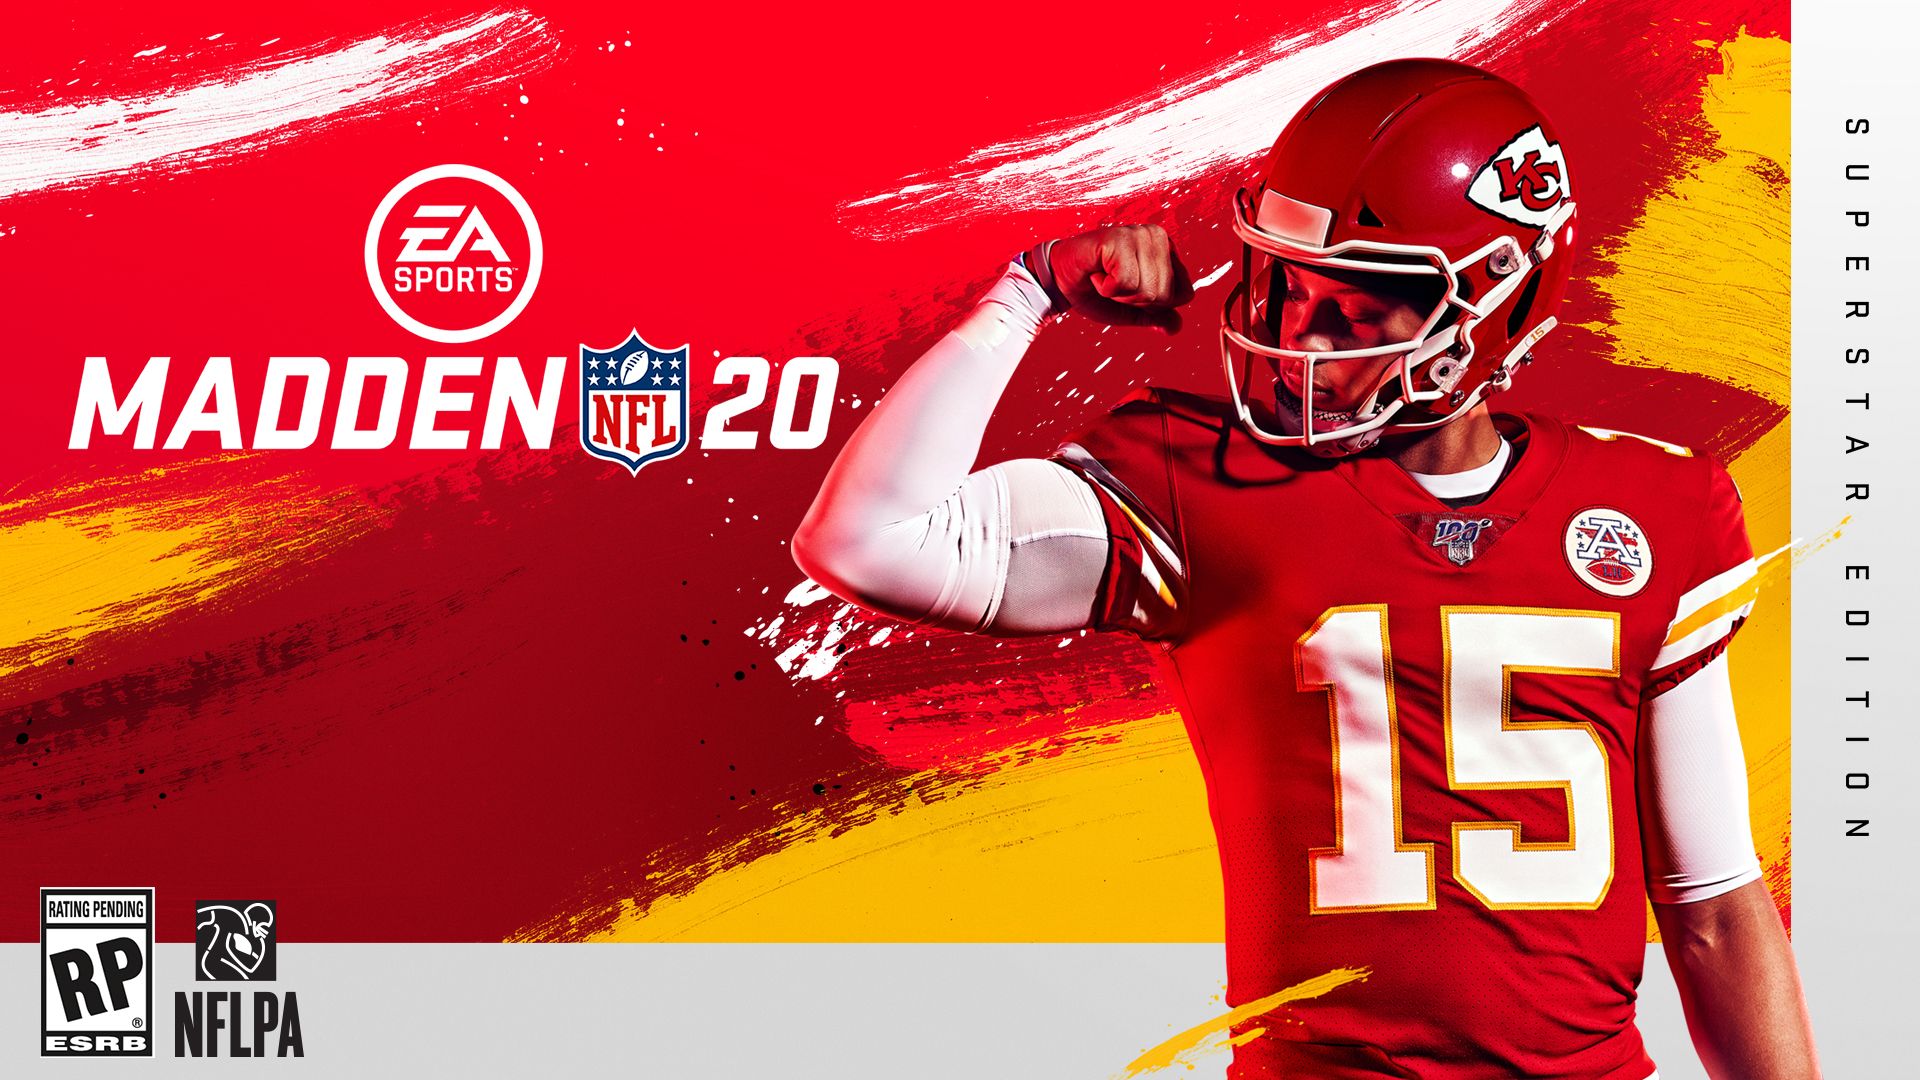 Feel Like A NFL Superstar In EA SPORTS Madden NFL 20 Featuring Face Of The Franchise: QB1 And Superstar X Factors, Available August 2nd